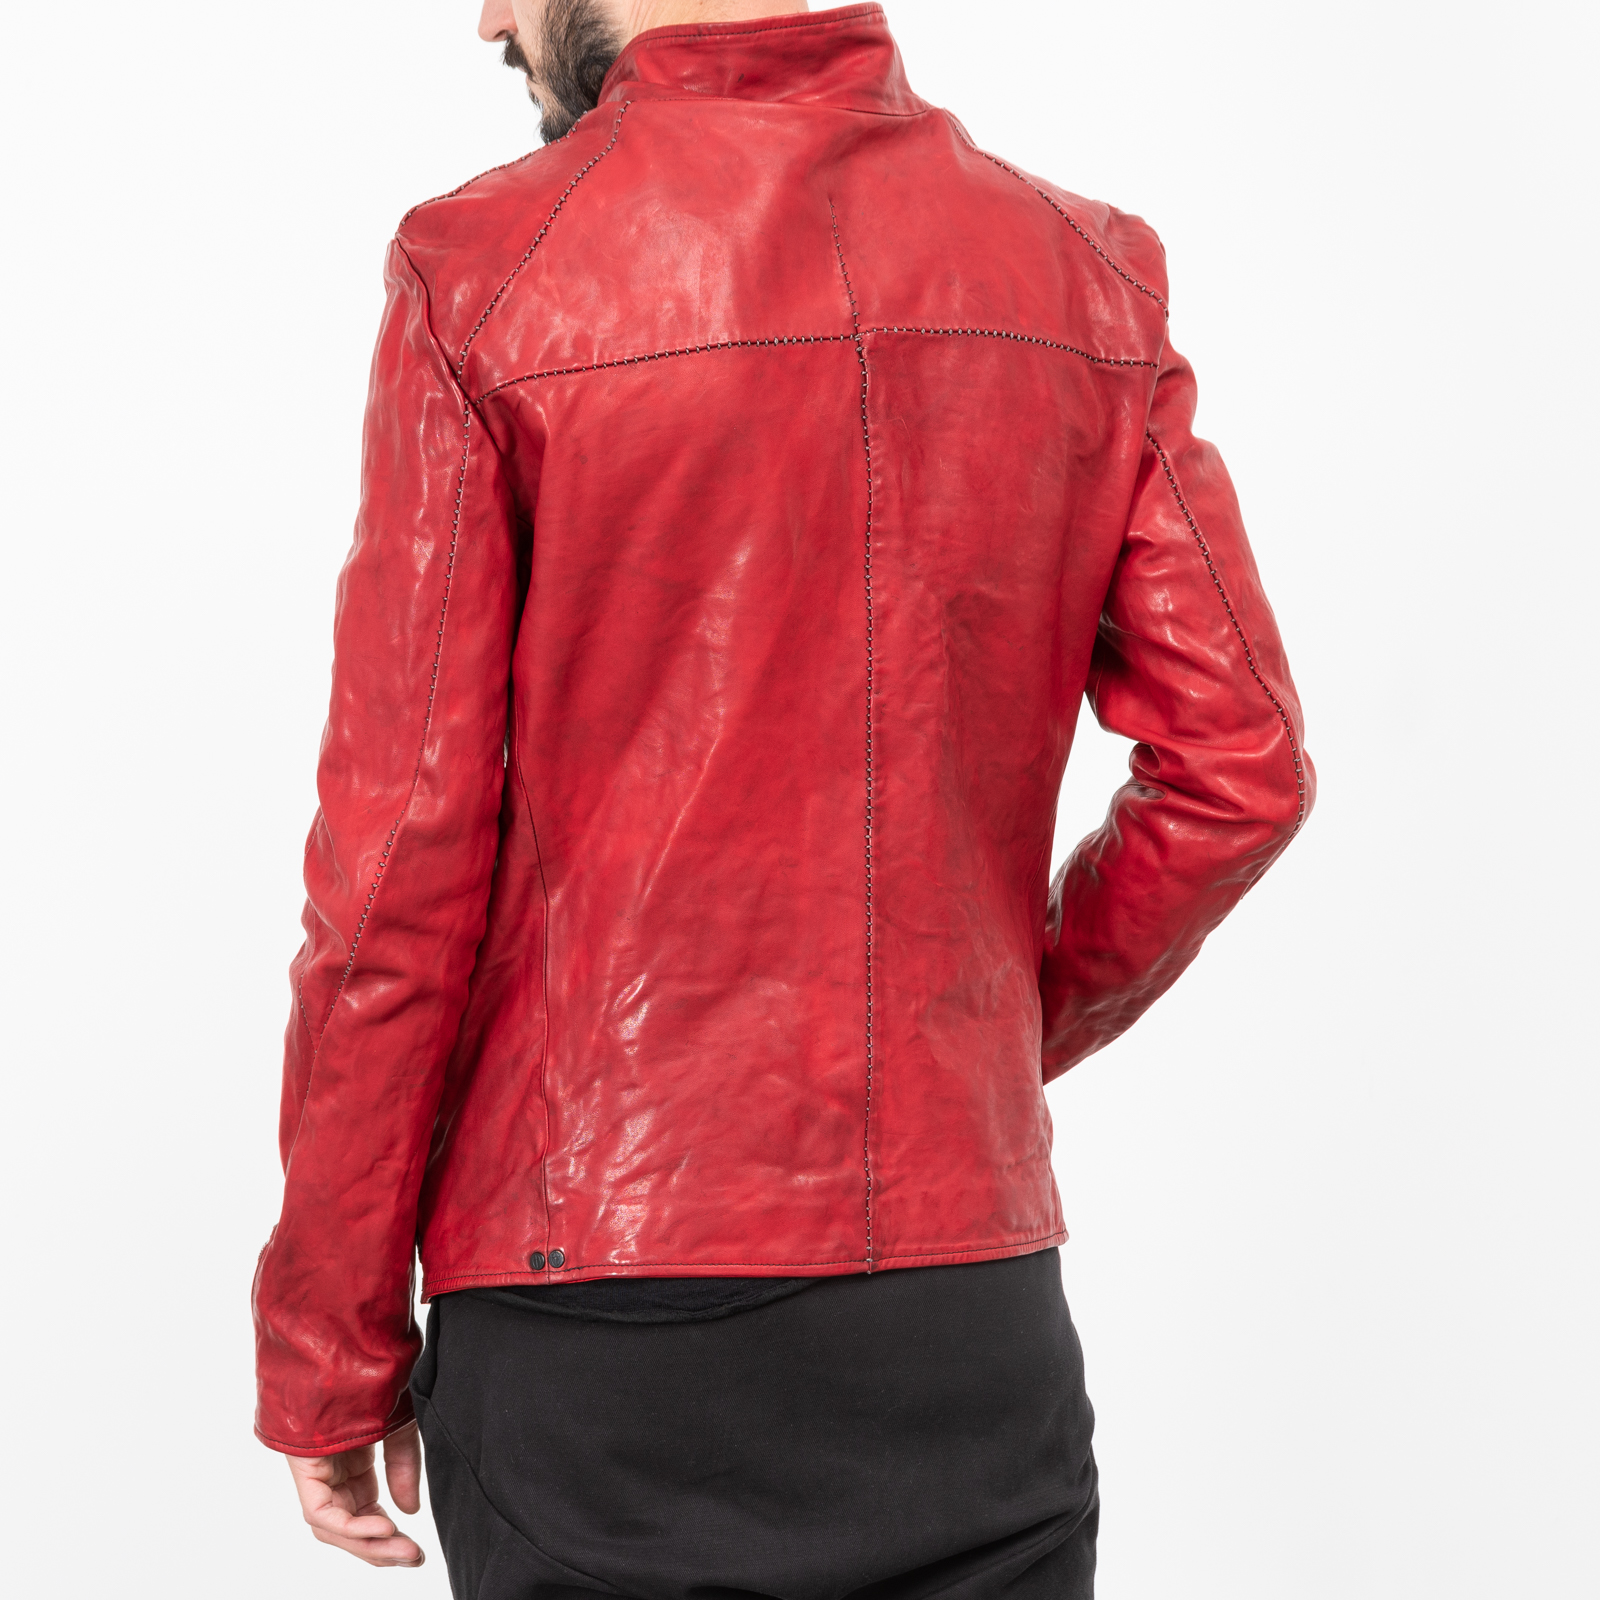 DIRTY RED HORSE LEATHER JACKET|wolfensson